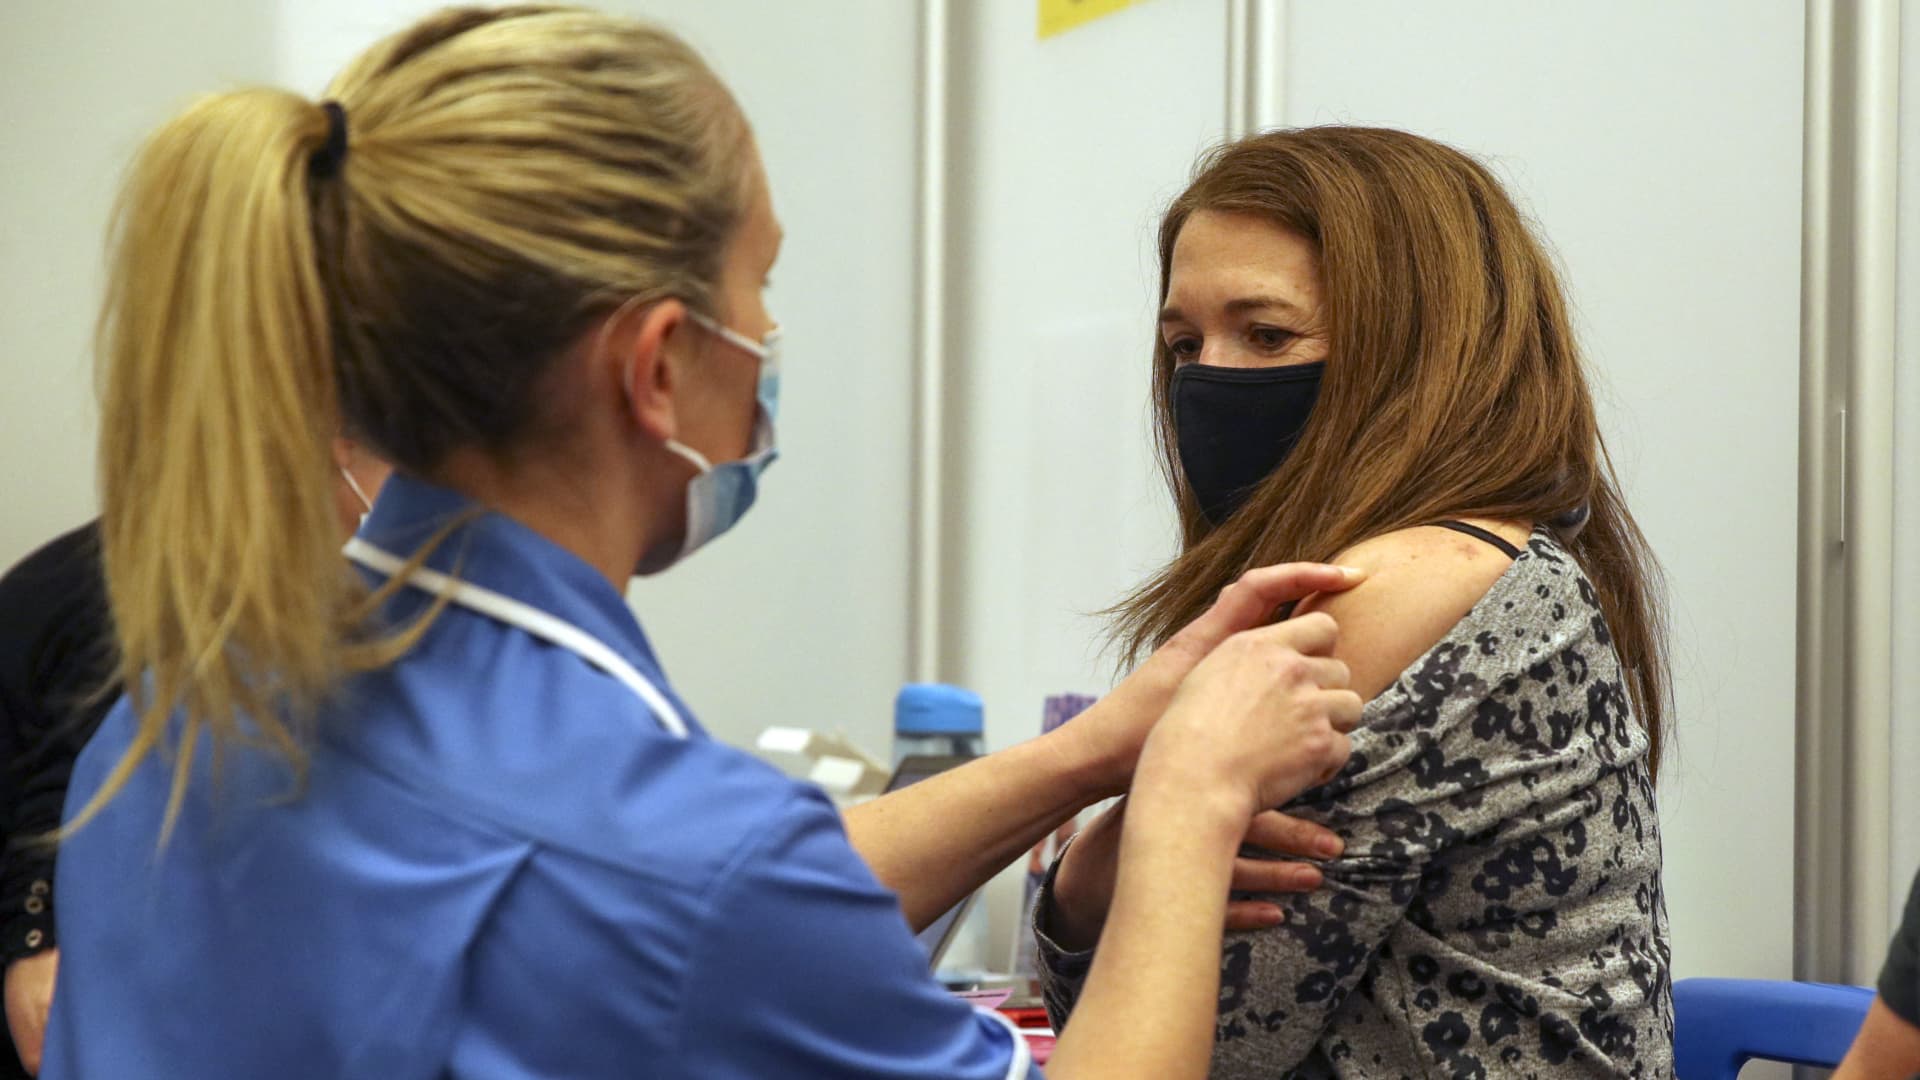 Caroline Nicolls receives an injection of the Moderna Covid-19 vaccine administered by nurse Amy Nash, at the Madejski Stadium in Reading, west of London on April 13, 2021.